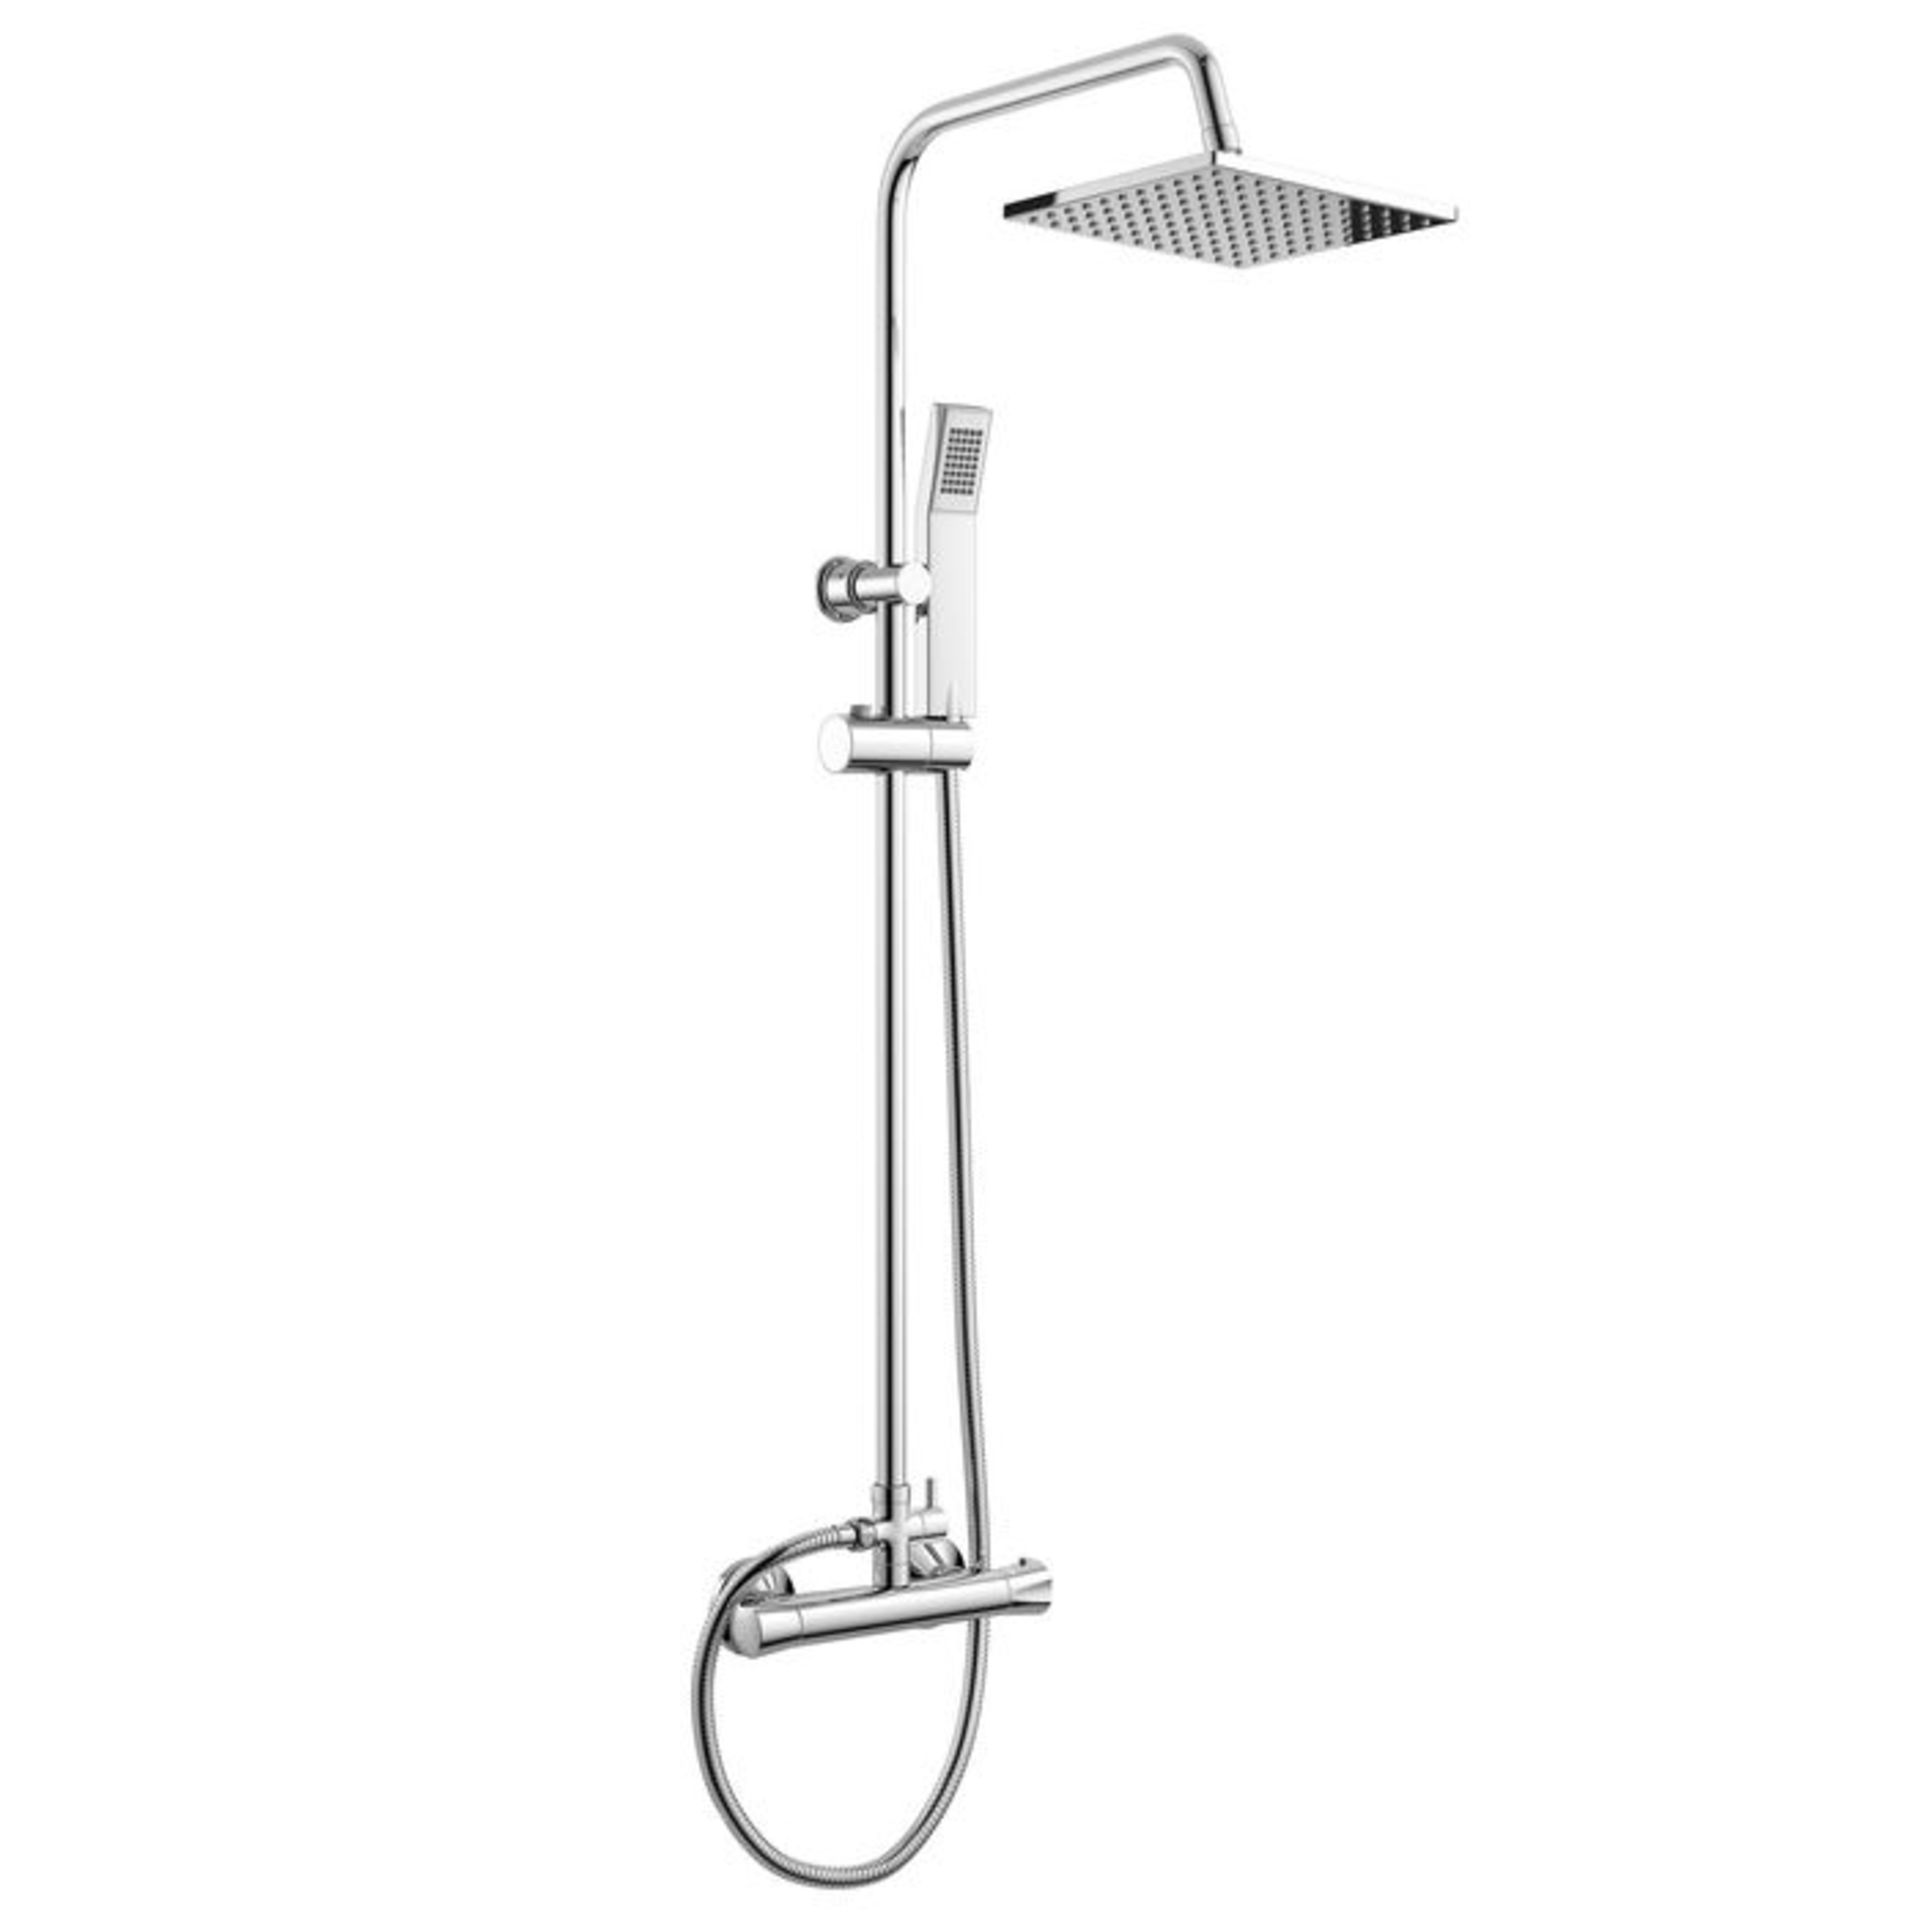 (DW108) Square Exposed Thermostatic Shower Kit & Head. Curved features and contemporary rounde...